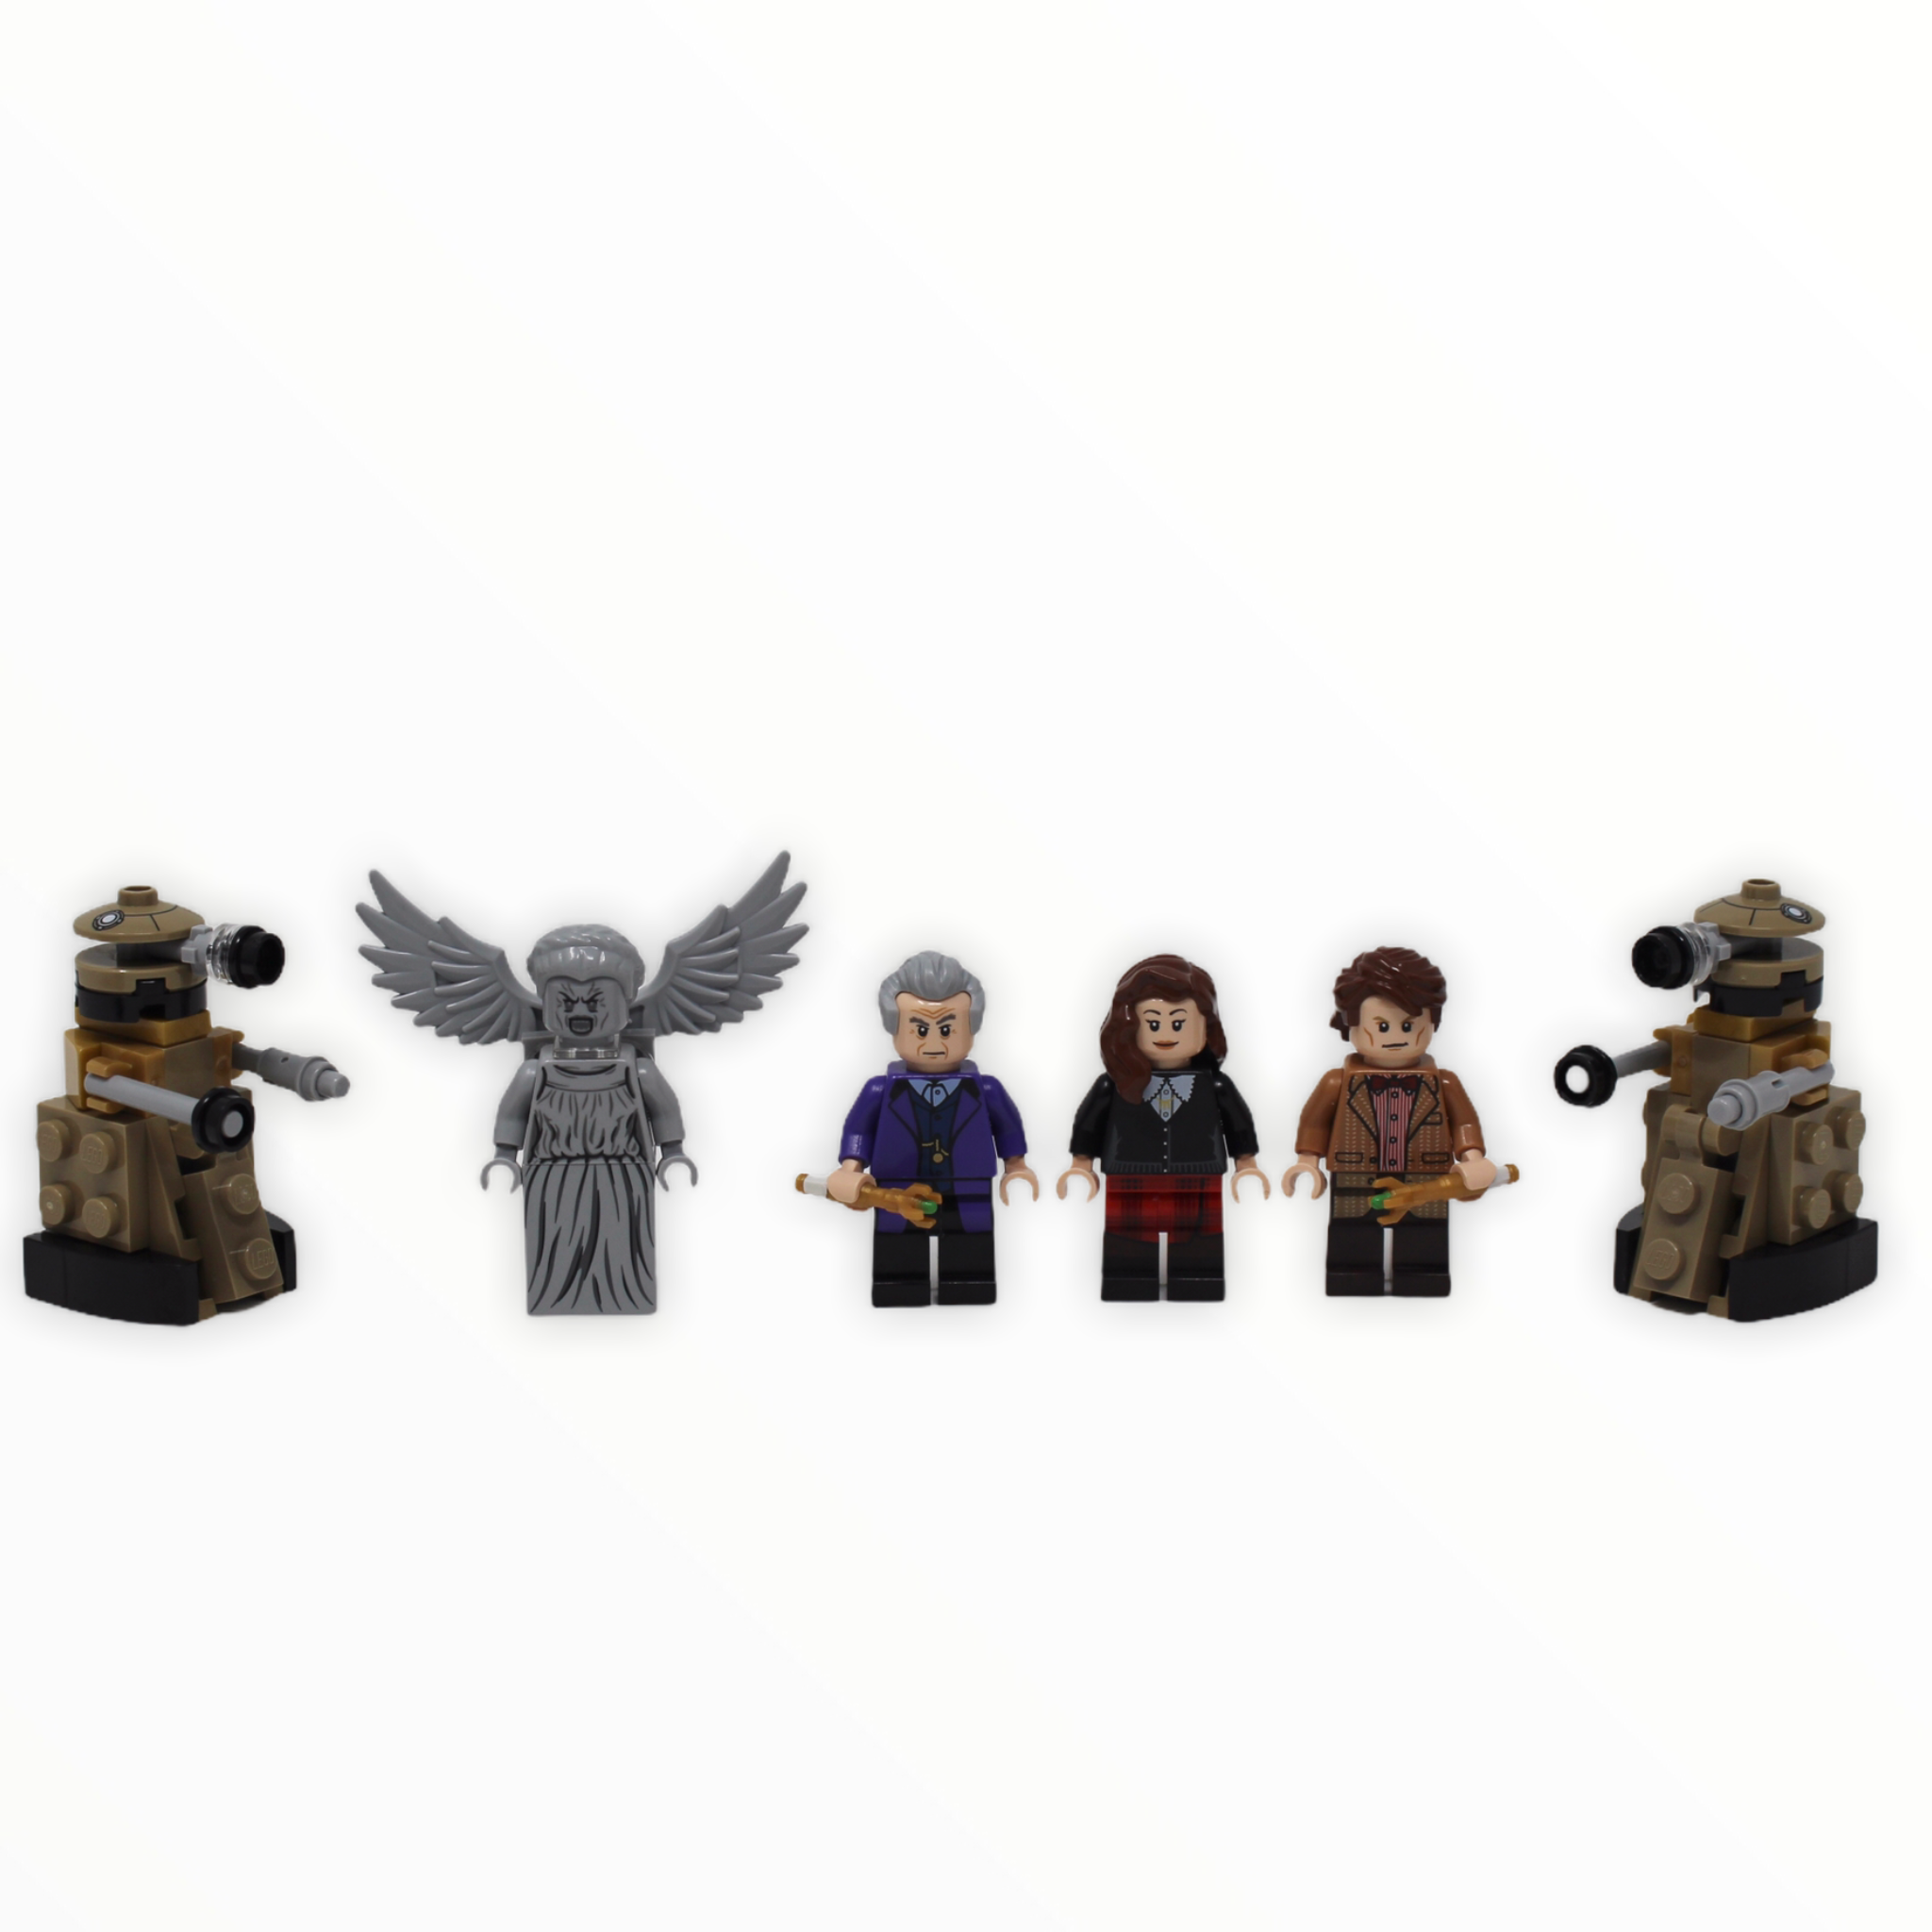 Lego Ideas Doctor Who 21304 + Incomplete Doctor Who For Parts(s)